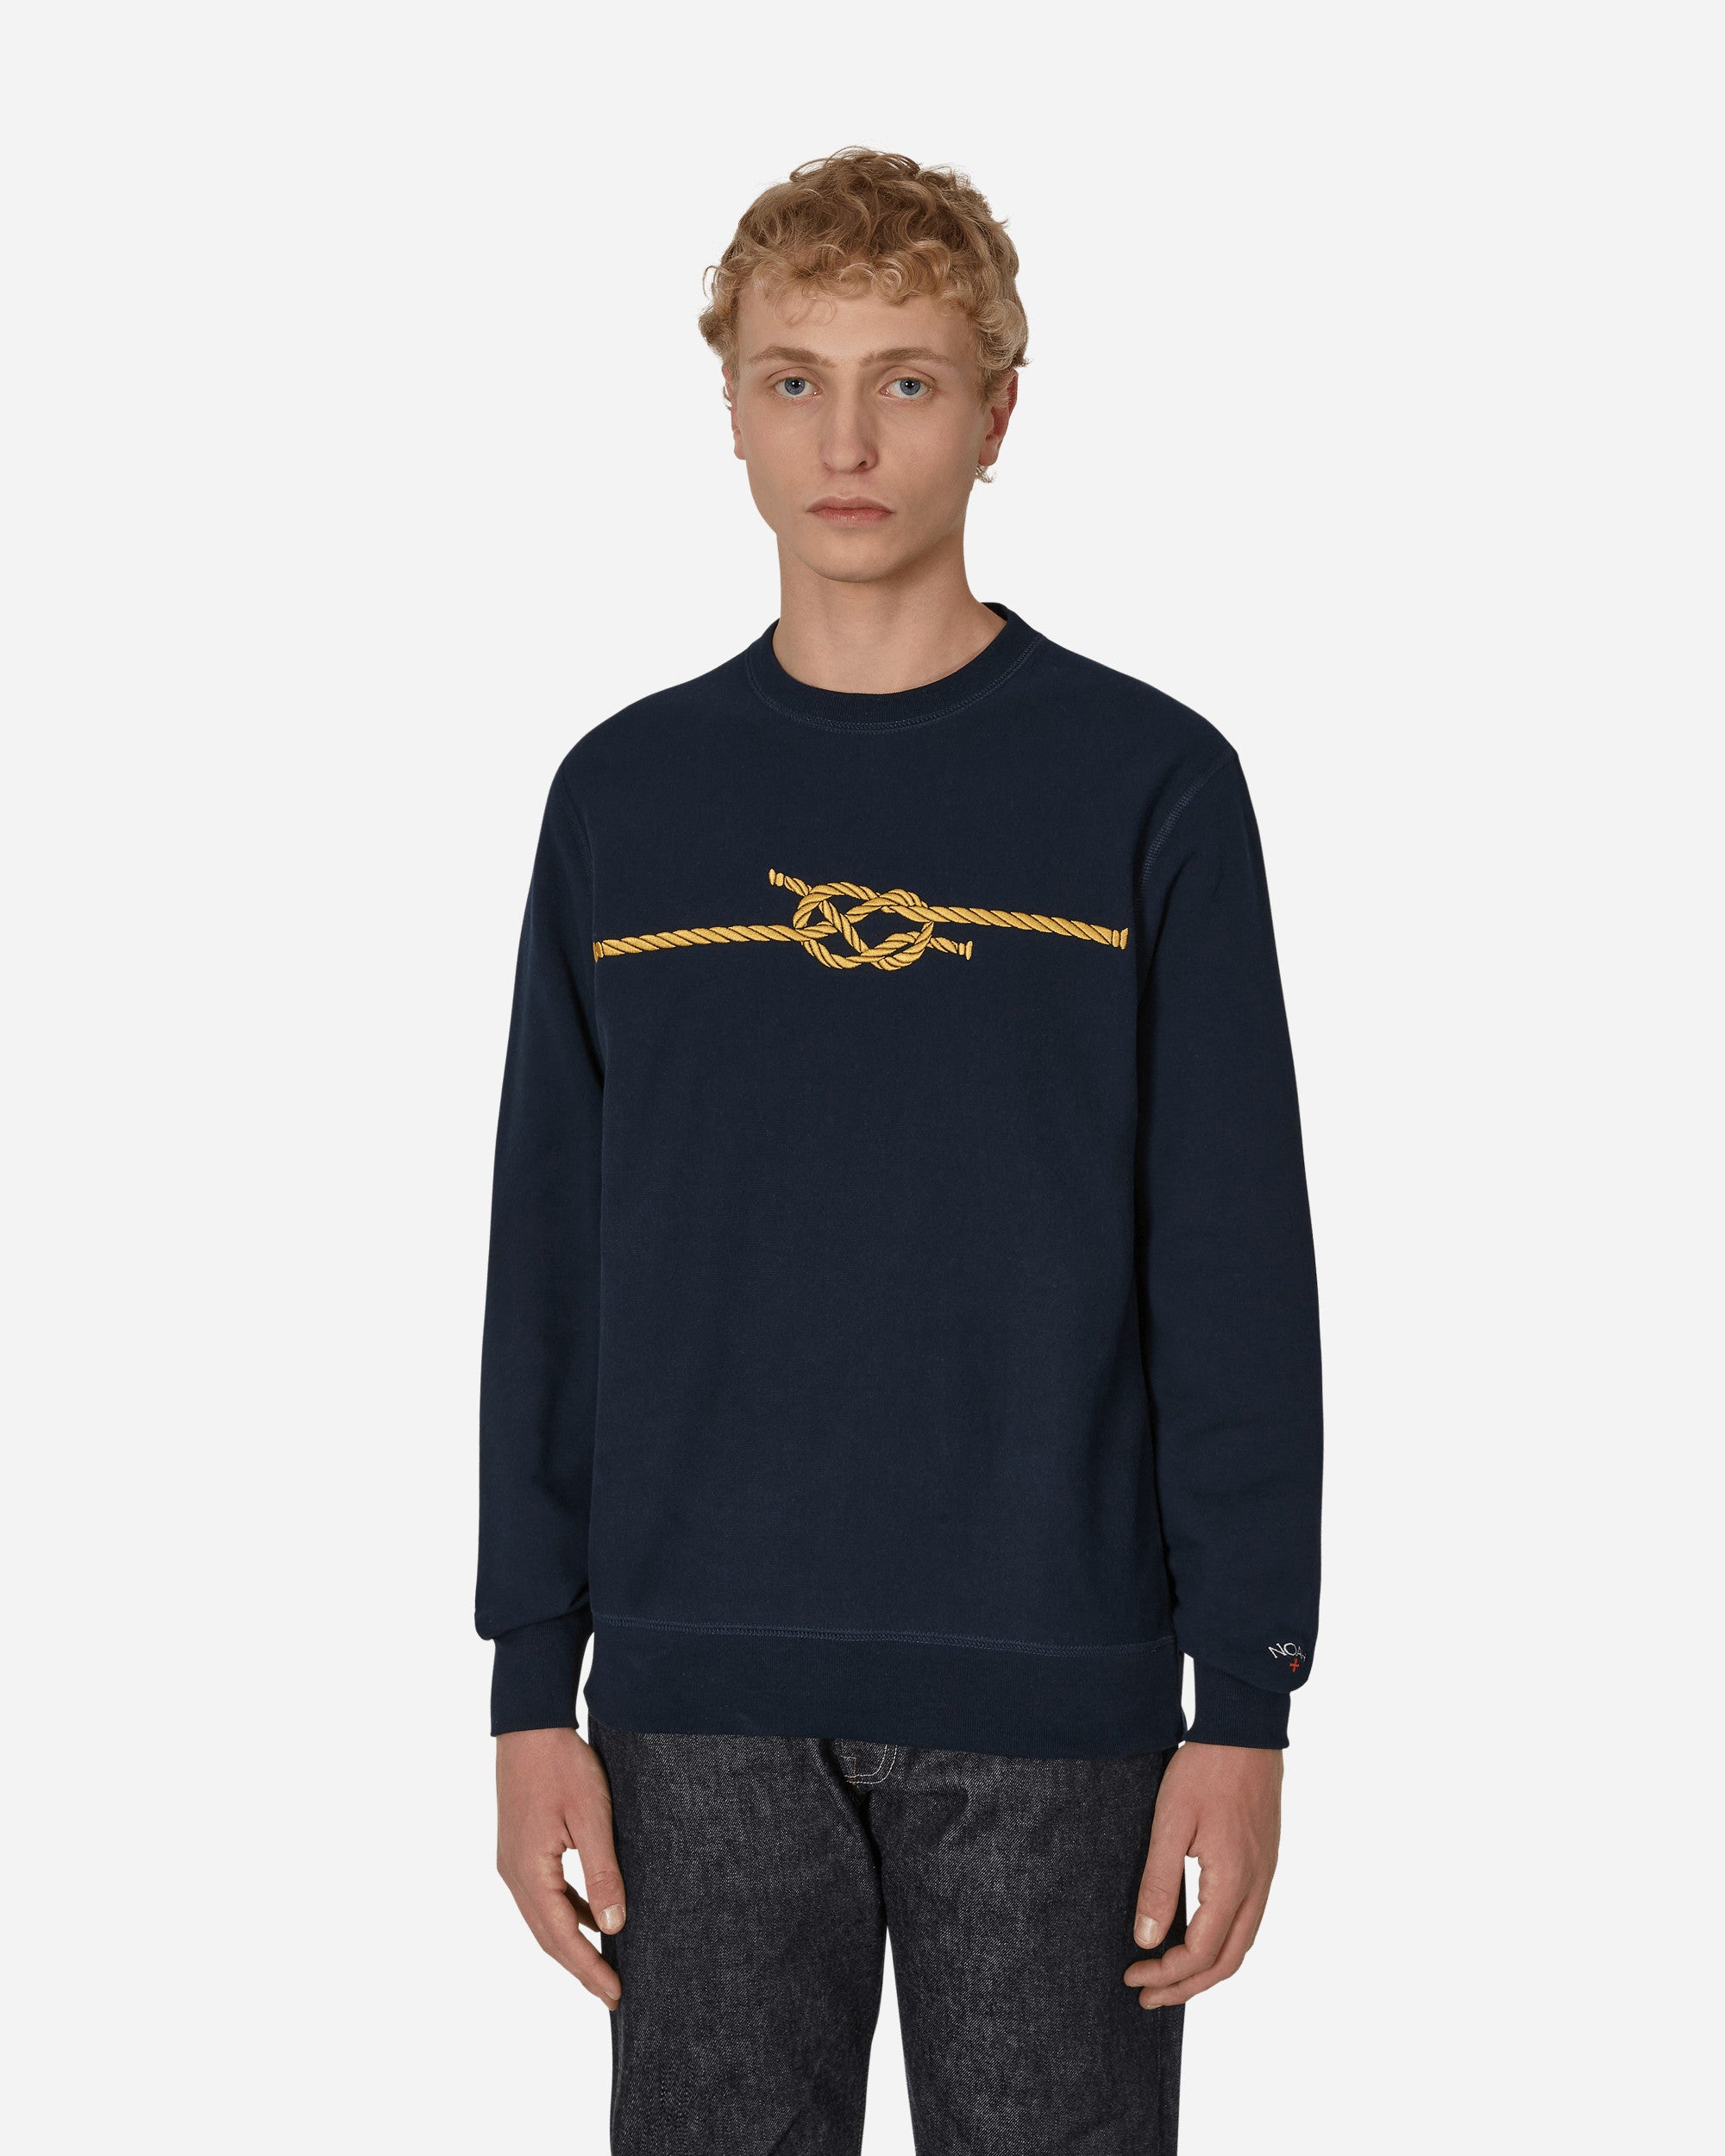 Noah Knot Crewneck Navy  Knitwears Sweaters SS070FW22 NVY